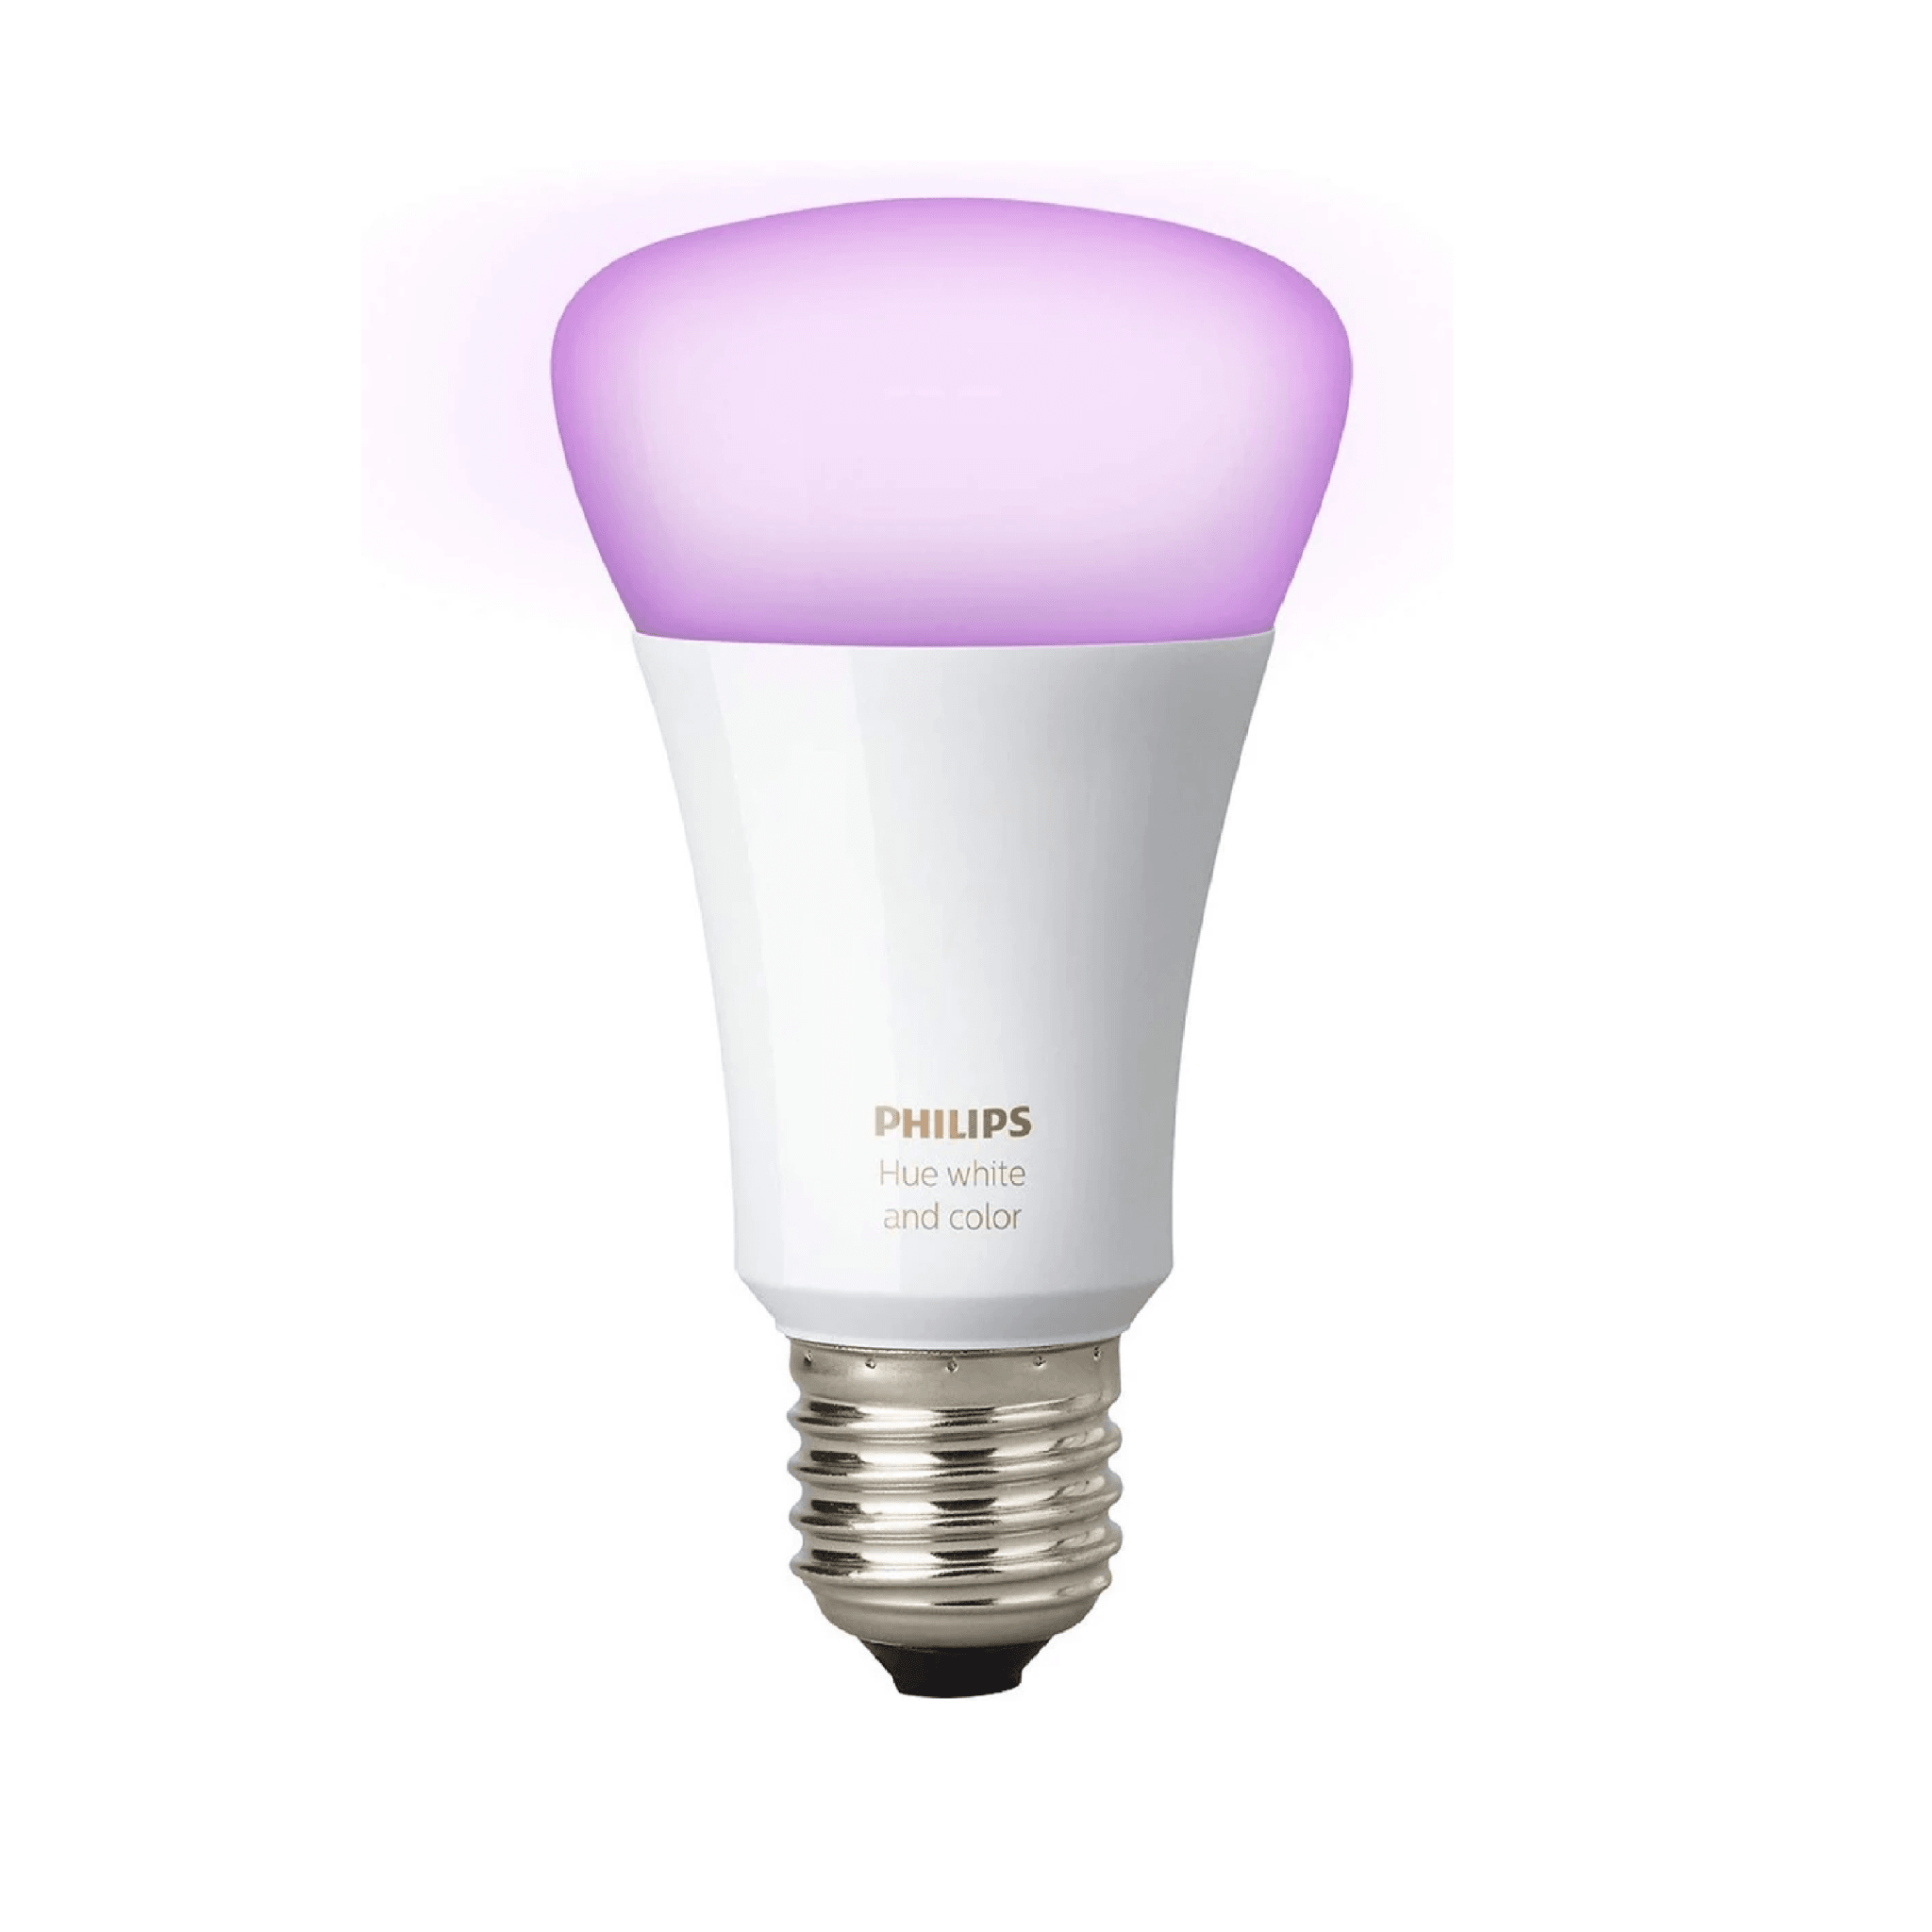 Philips HUE White & Color Ambiance LED Smart Bulb - Store 974 | ستور ٩٧٤